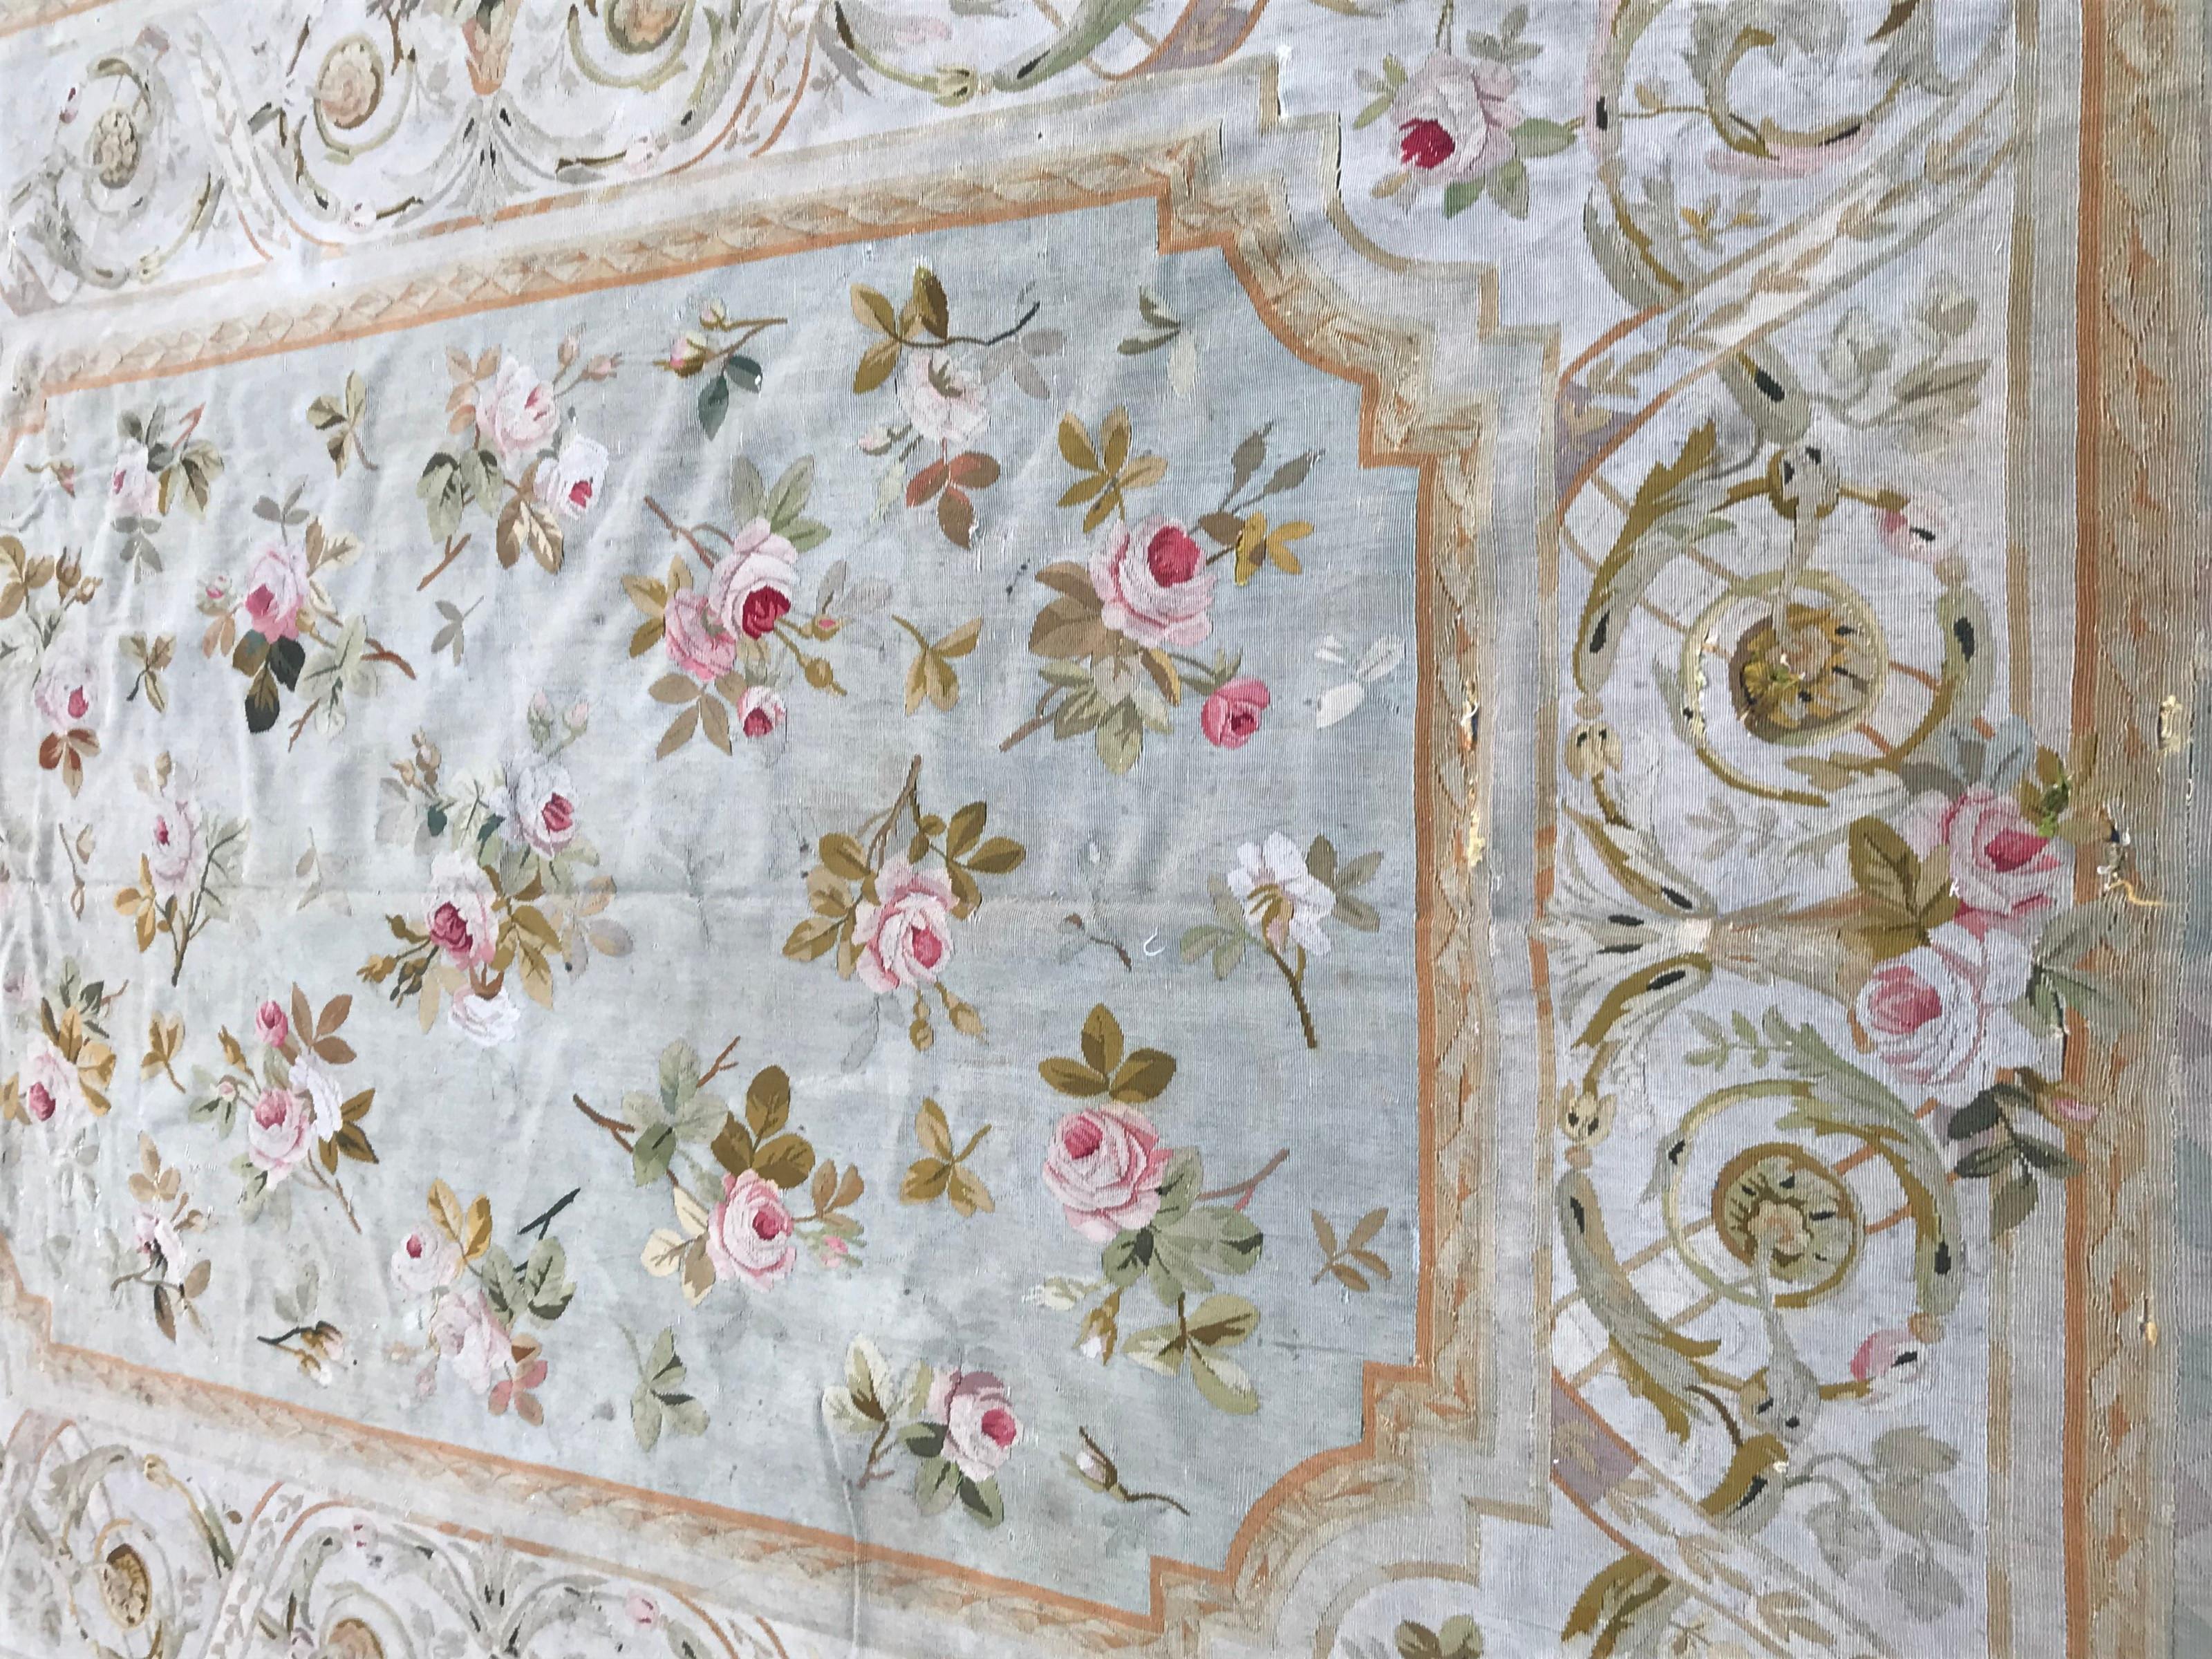 Nice antique Aubusson rug with beautiful light colors with green, and floral Napoleon the third design, entirely handwoven with wool on cotton foundation, damaged at essentially one extremity.